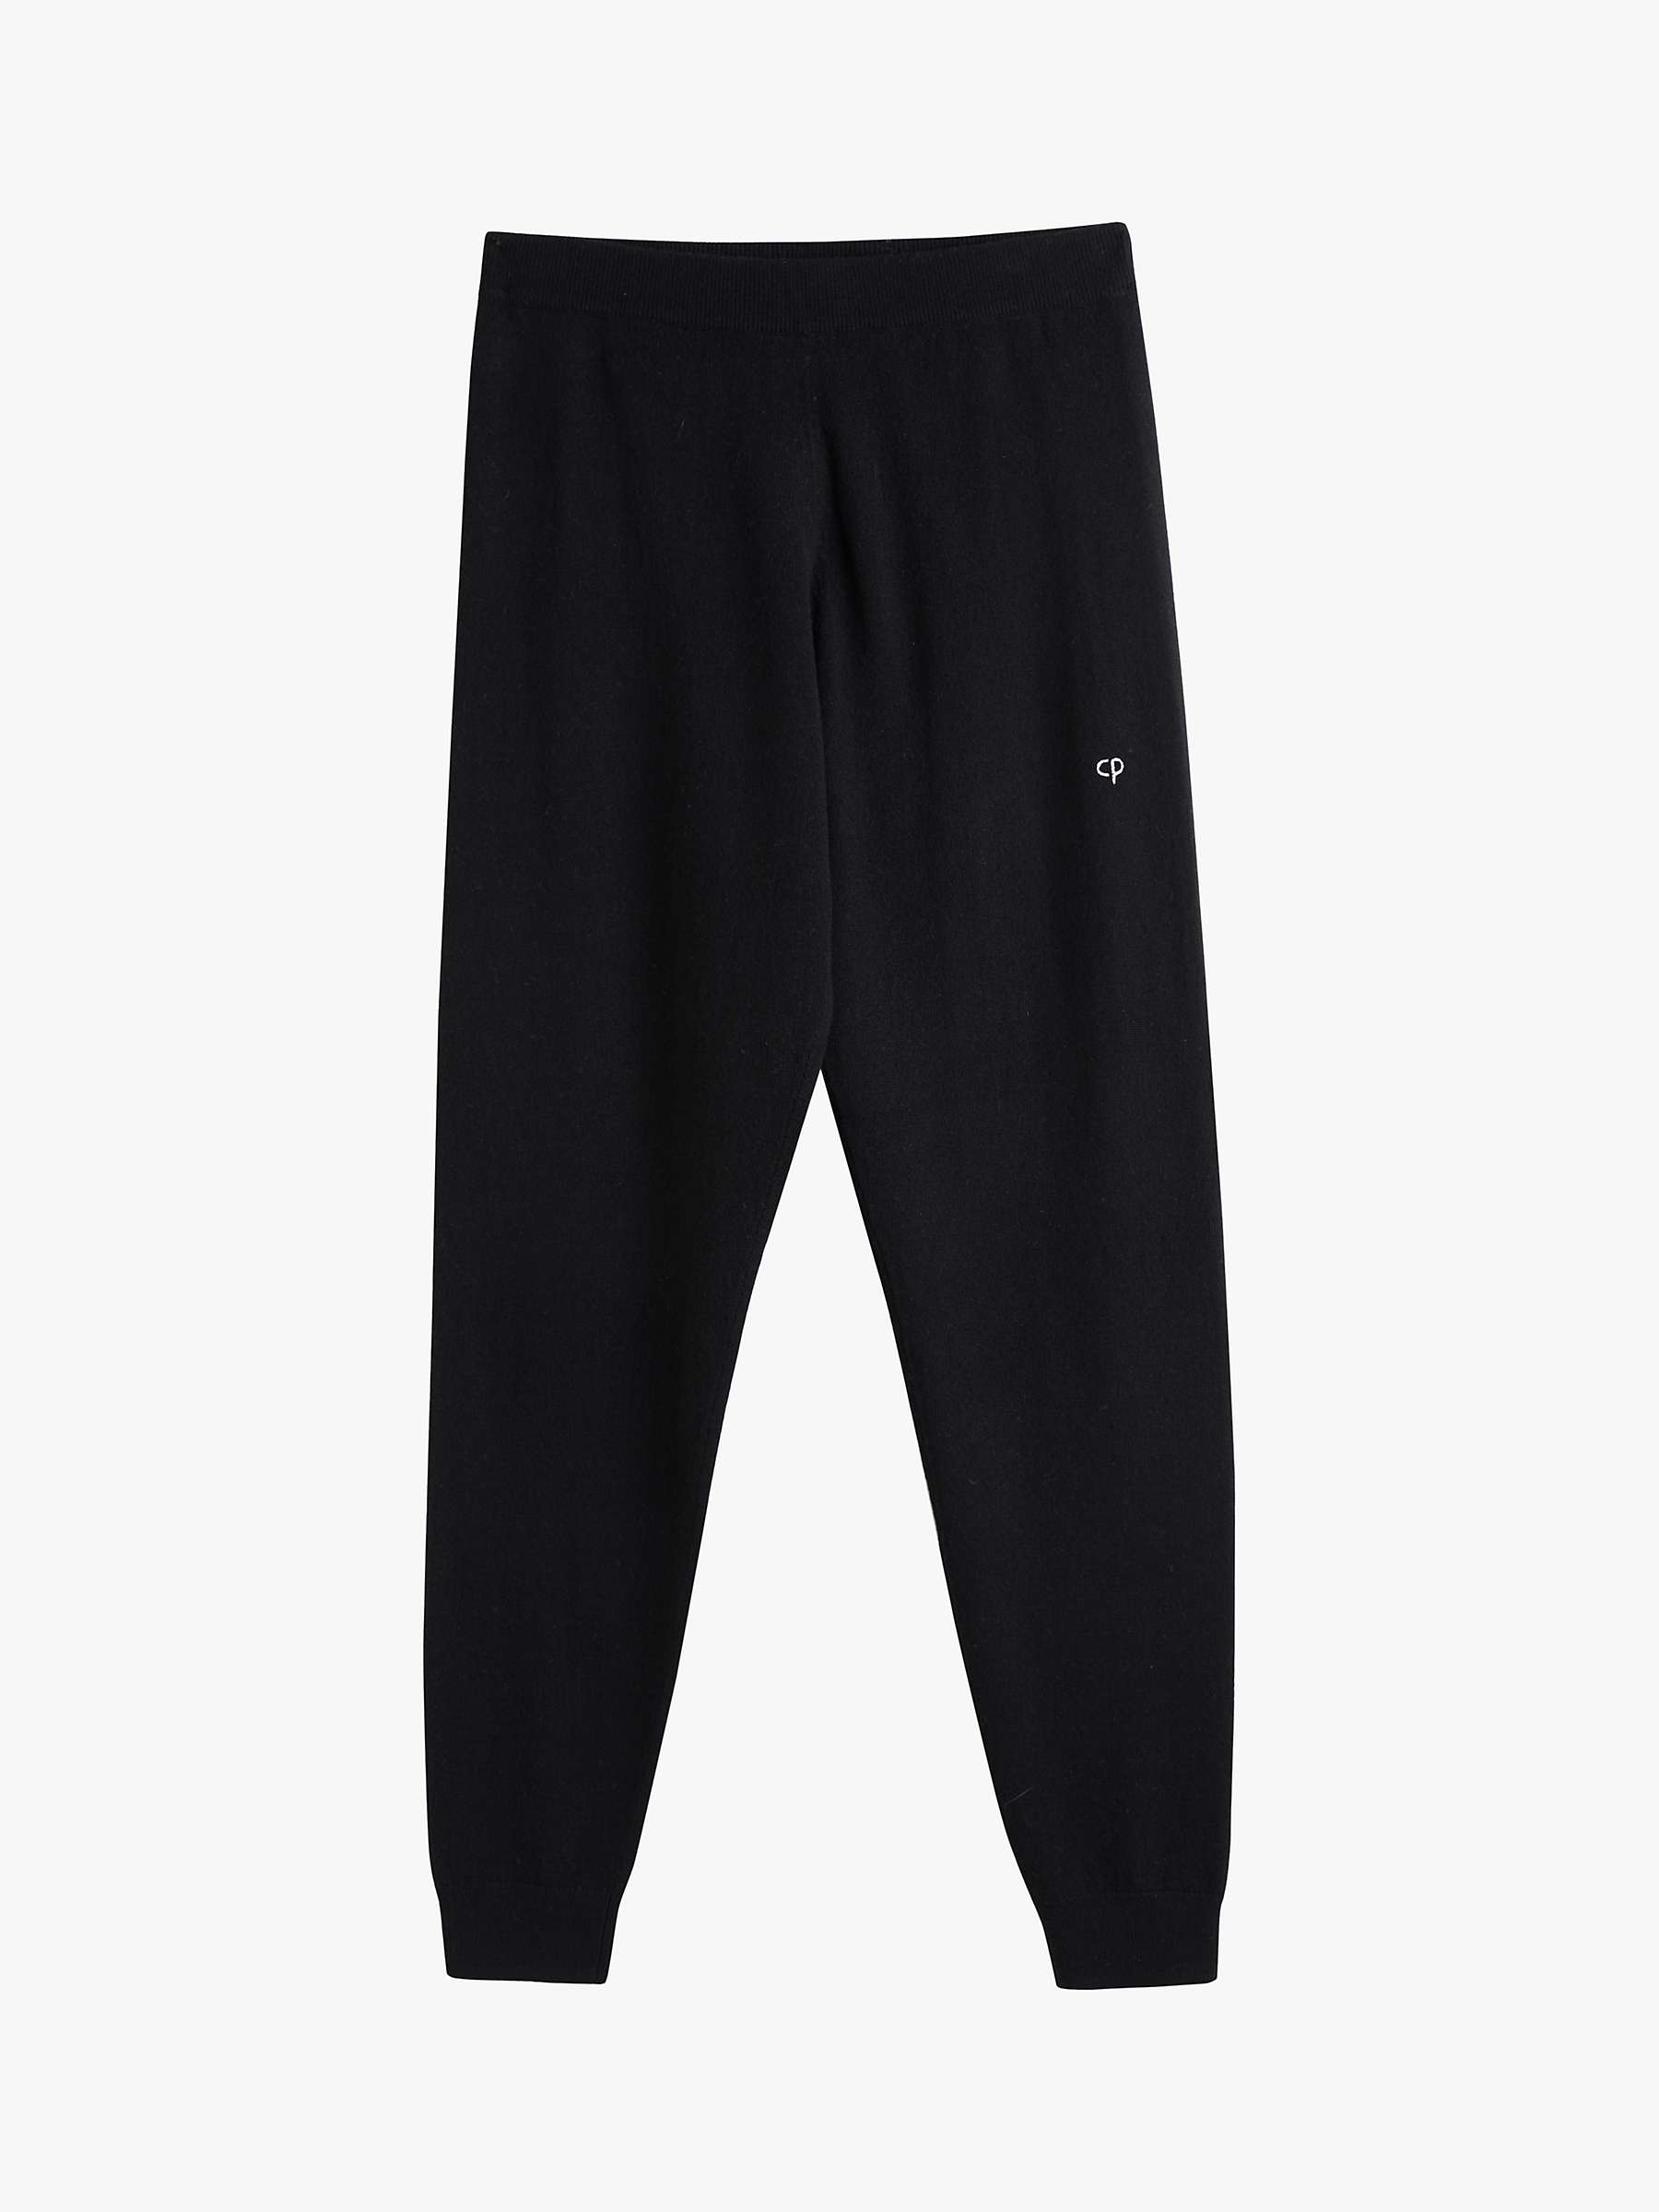 Buy Chinti & Parker Wool and Cashmere Blend Star Track Joggers, Black Online at johnlewis.com